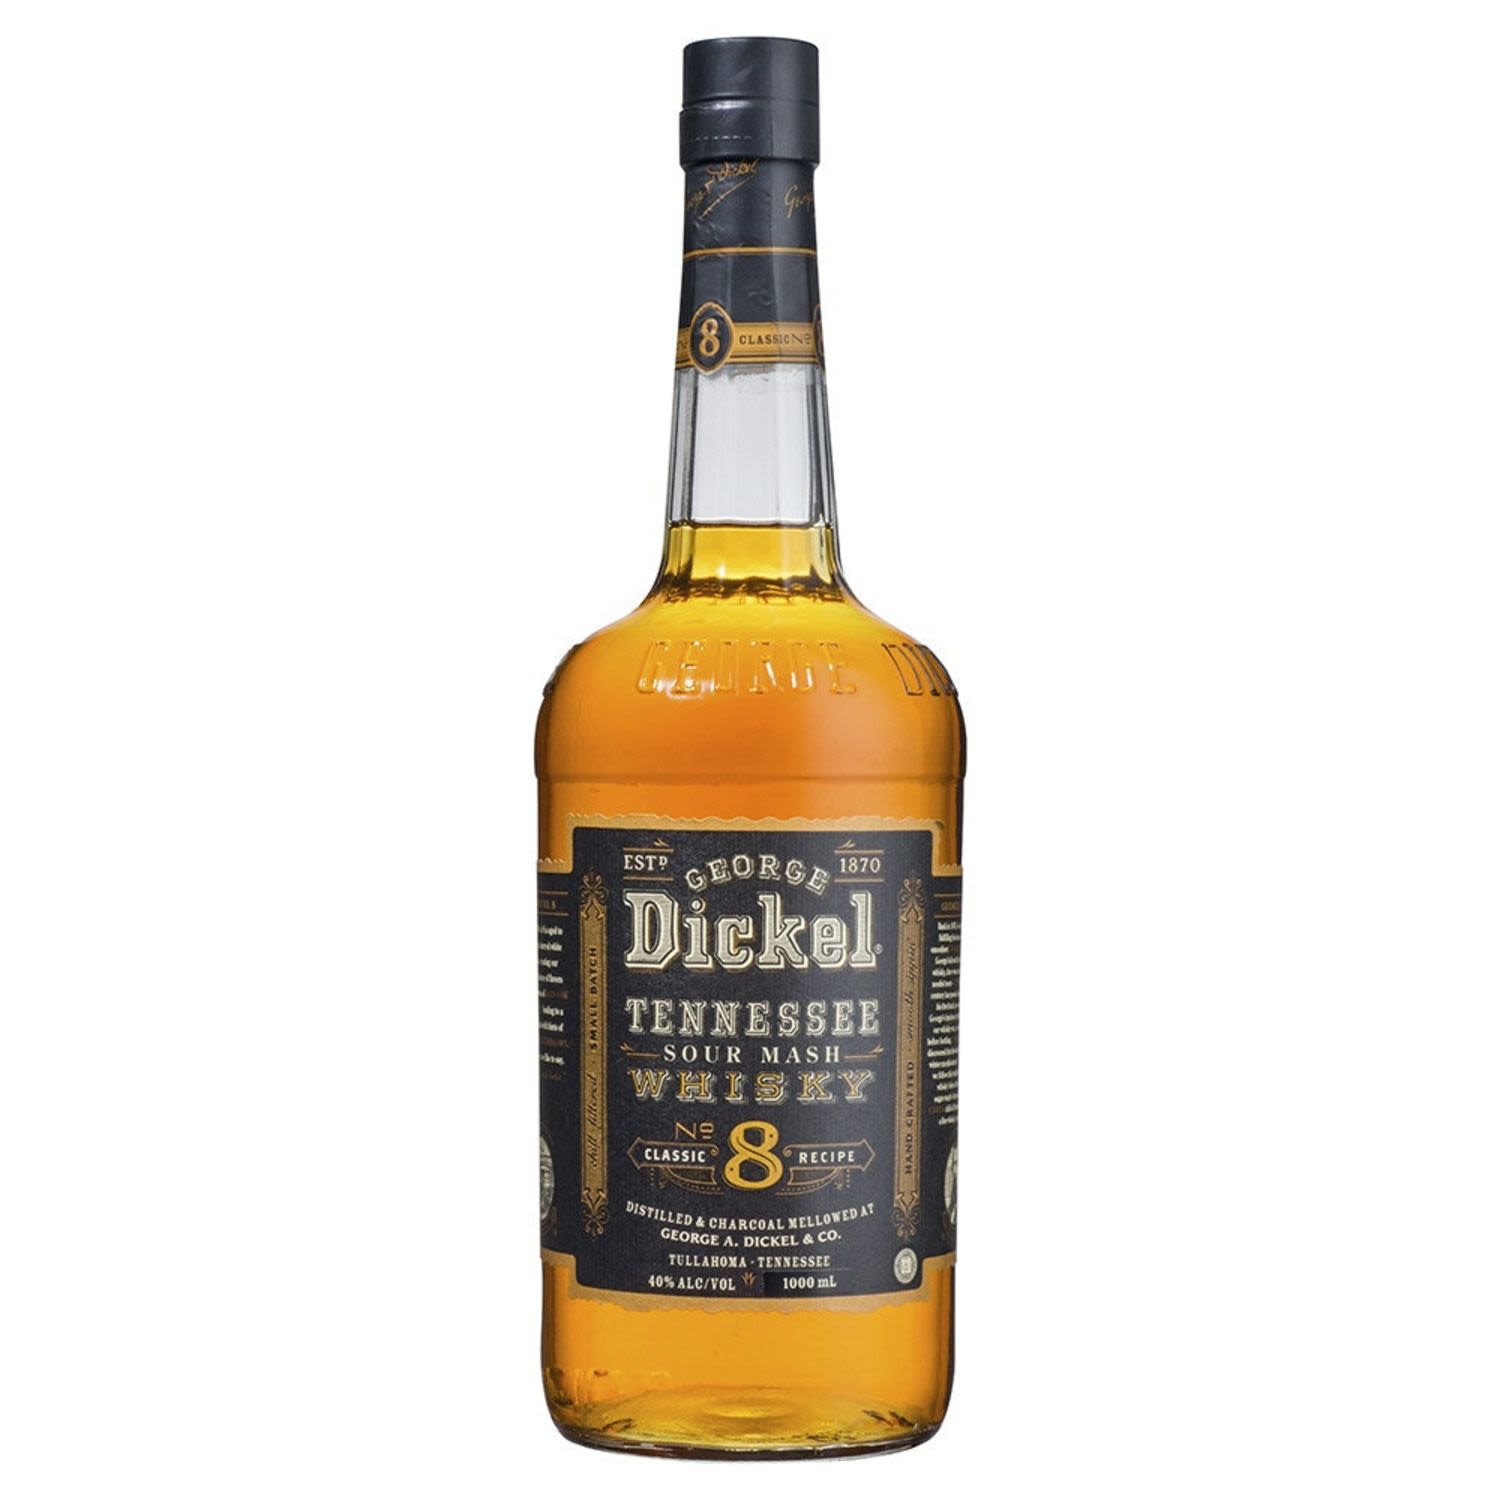 George Dickel No 8 Tennessee Sour Mash Whisky 1L Bottle